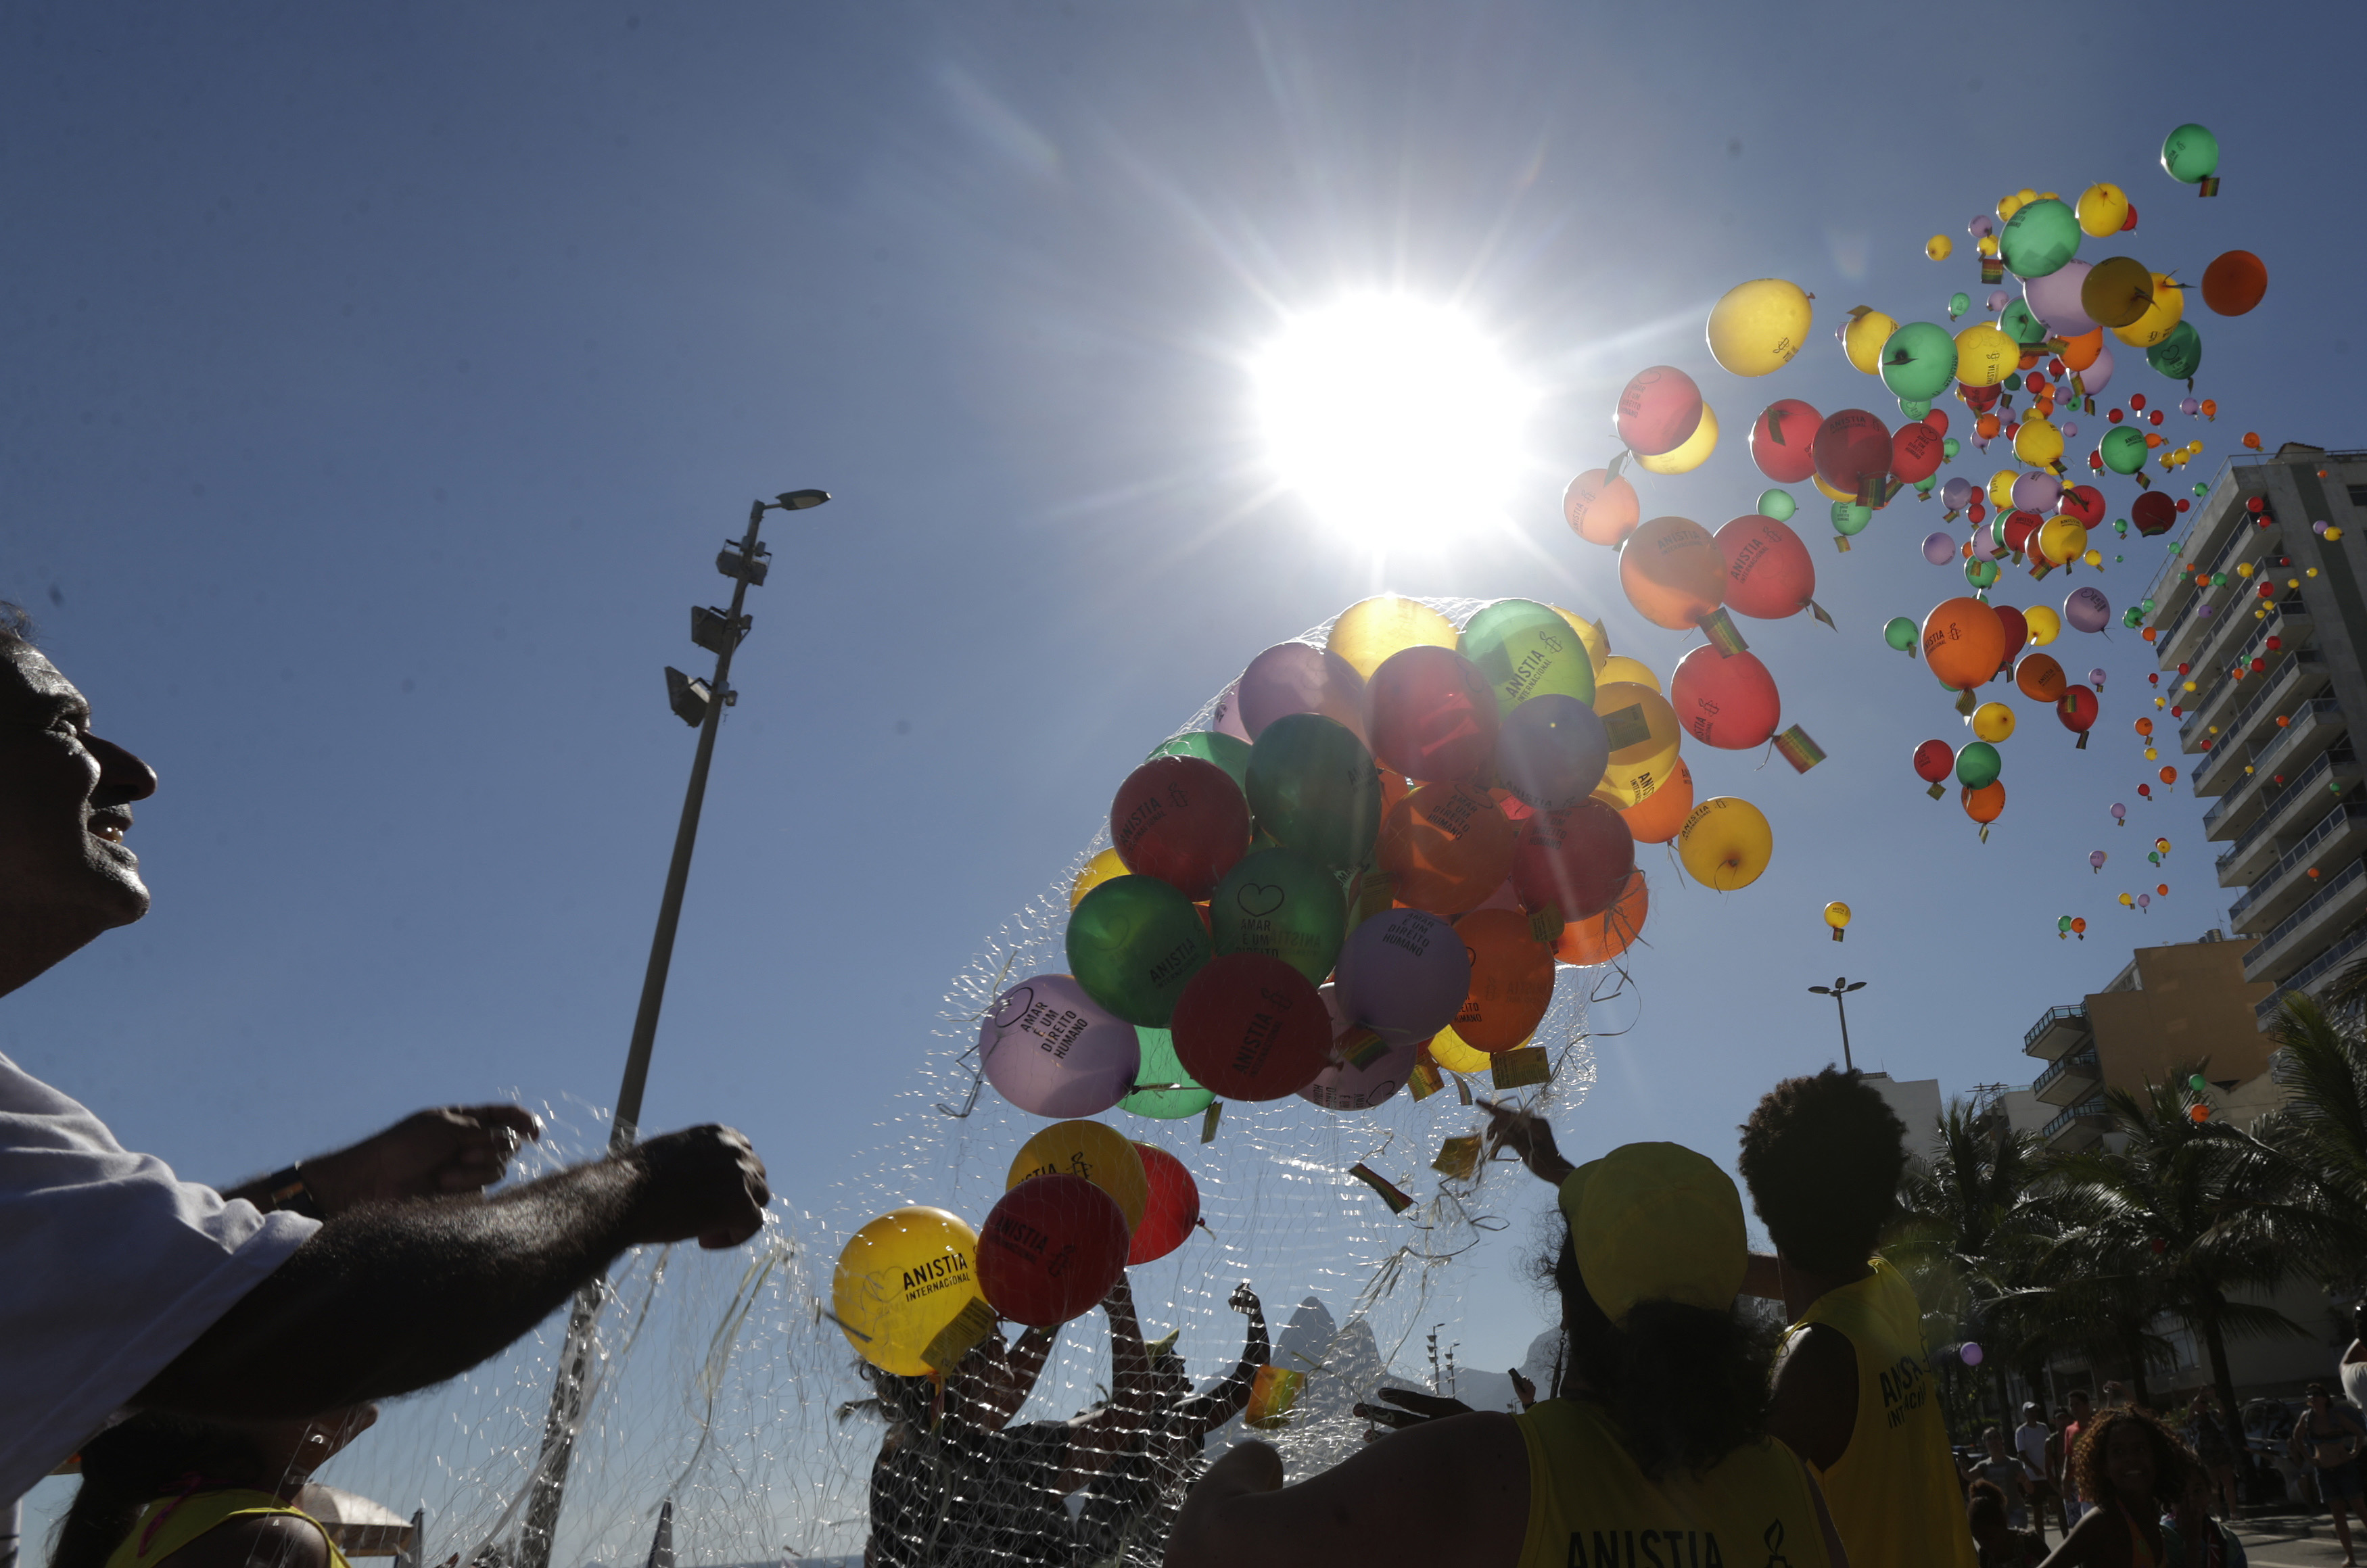 2 Februrary 2014, Brazil. Demonstrators in Rio de Janeiro release balloons printed with messages directed against Russia's President Vladimir Putin and anti-gay laws.